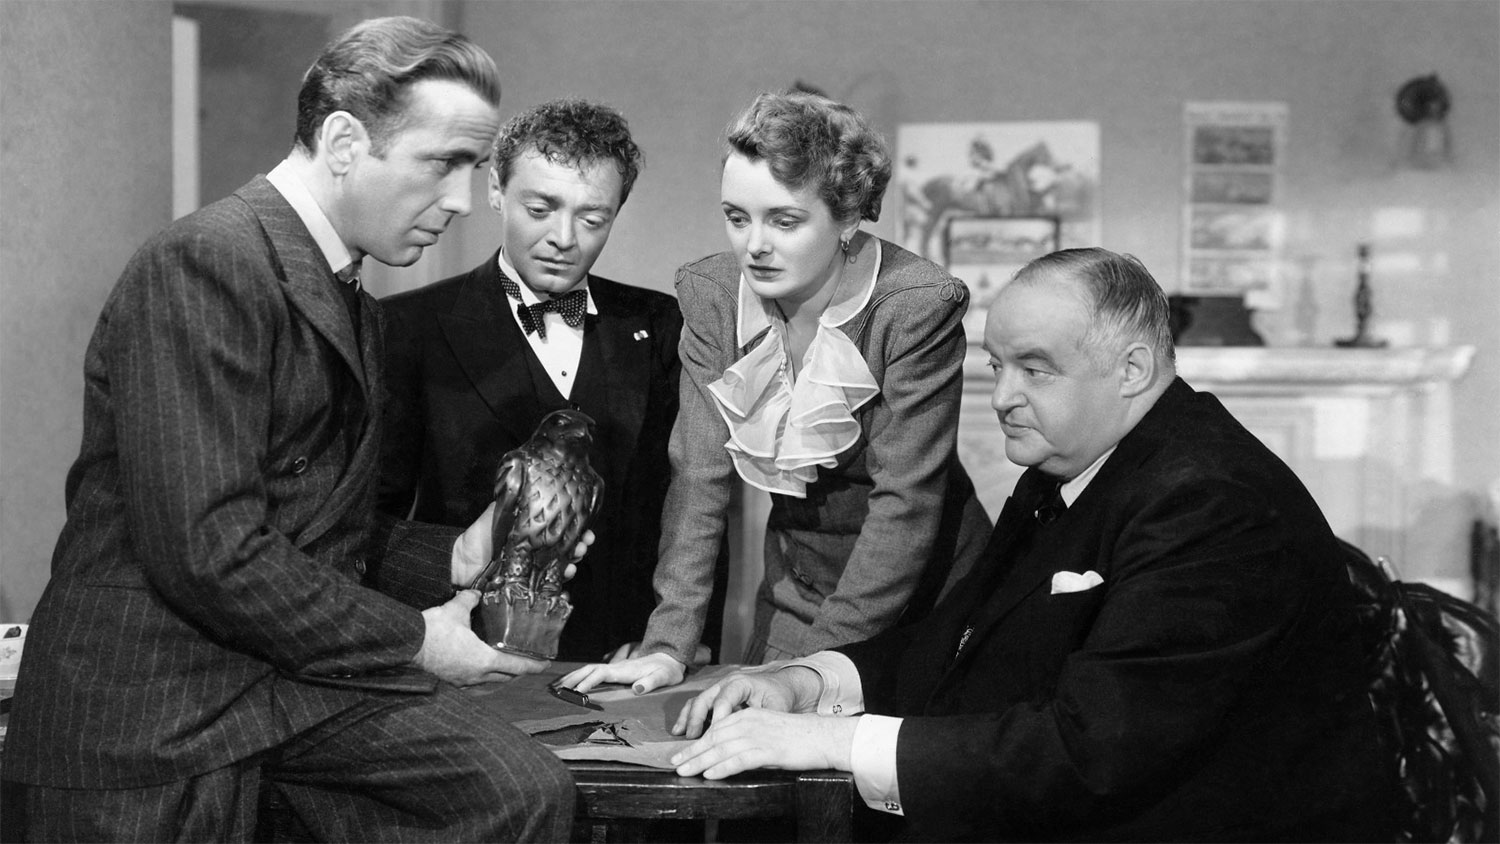 The cast of The Maltese Falcon looking at the titular statue.